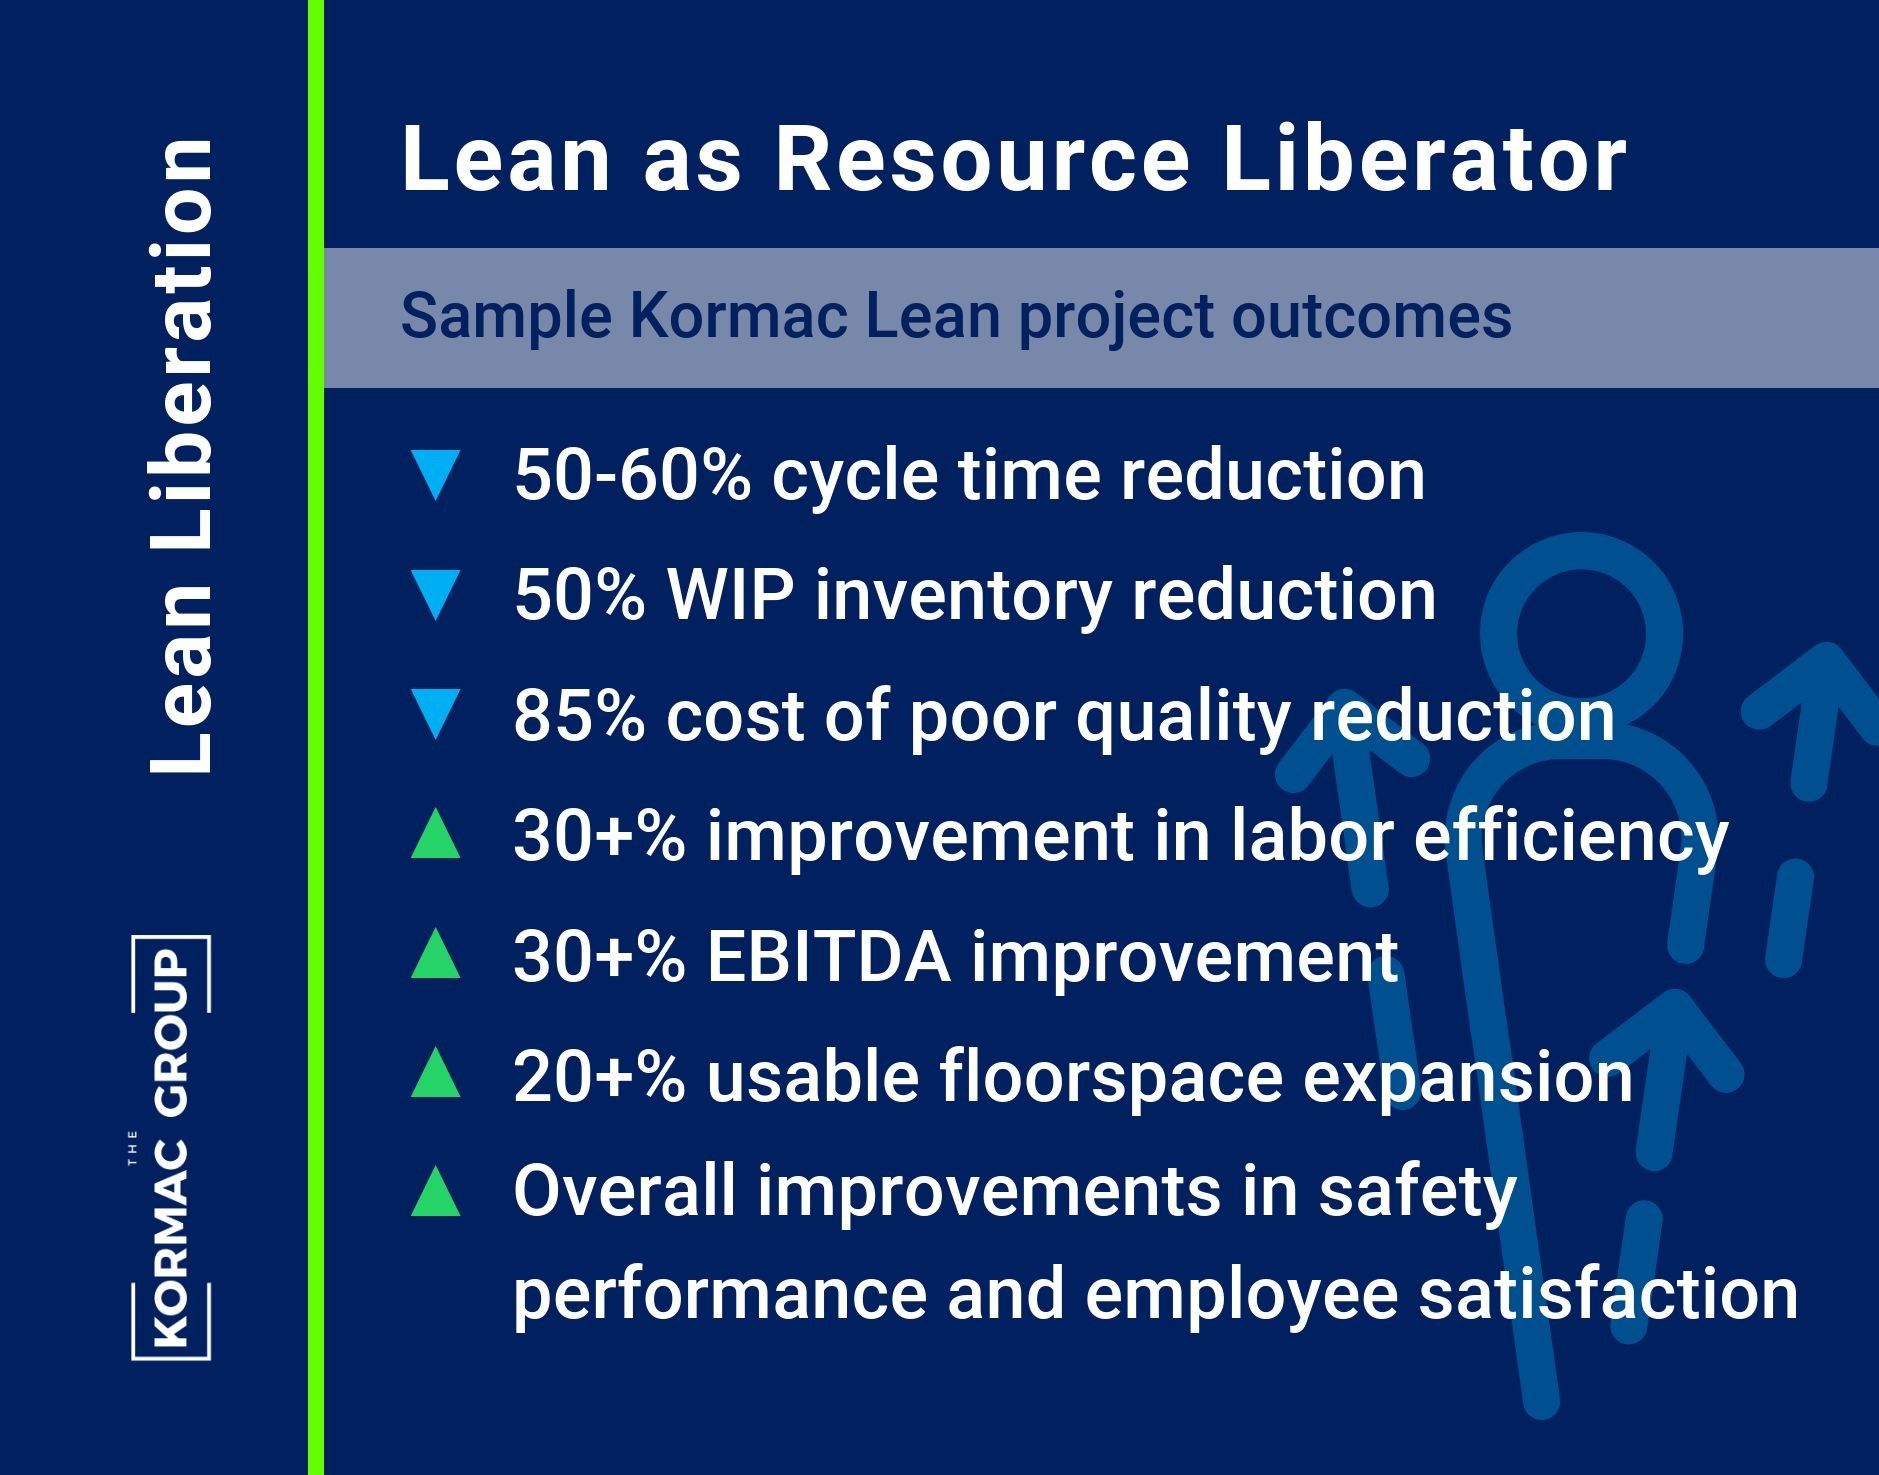 Lean Liberation Lean as Resource Liberator Sample Kormac Lean project outcomes - -50-60% cycle time reduction - -50% WIP inventory reduction - -85% cost of poor quality reduction - +30+% improvement in labor efficiency - +30+% EBITDA improvement - +20+% useable floorspace expansion - Overall improvements in safety performance and employee satisfaction